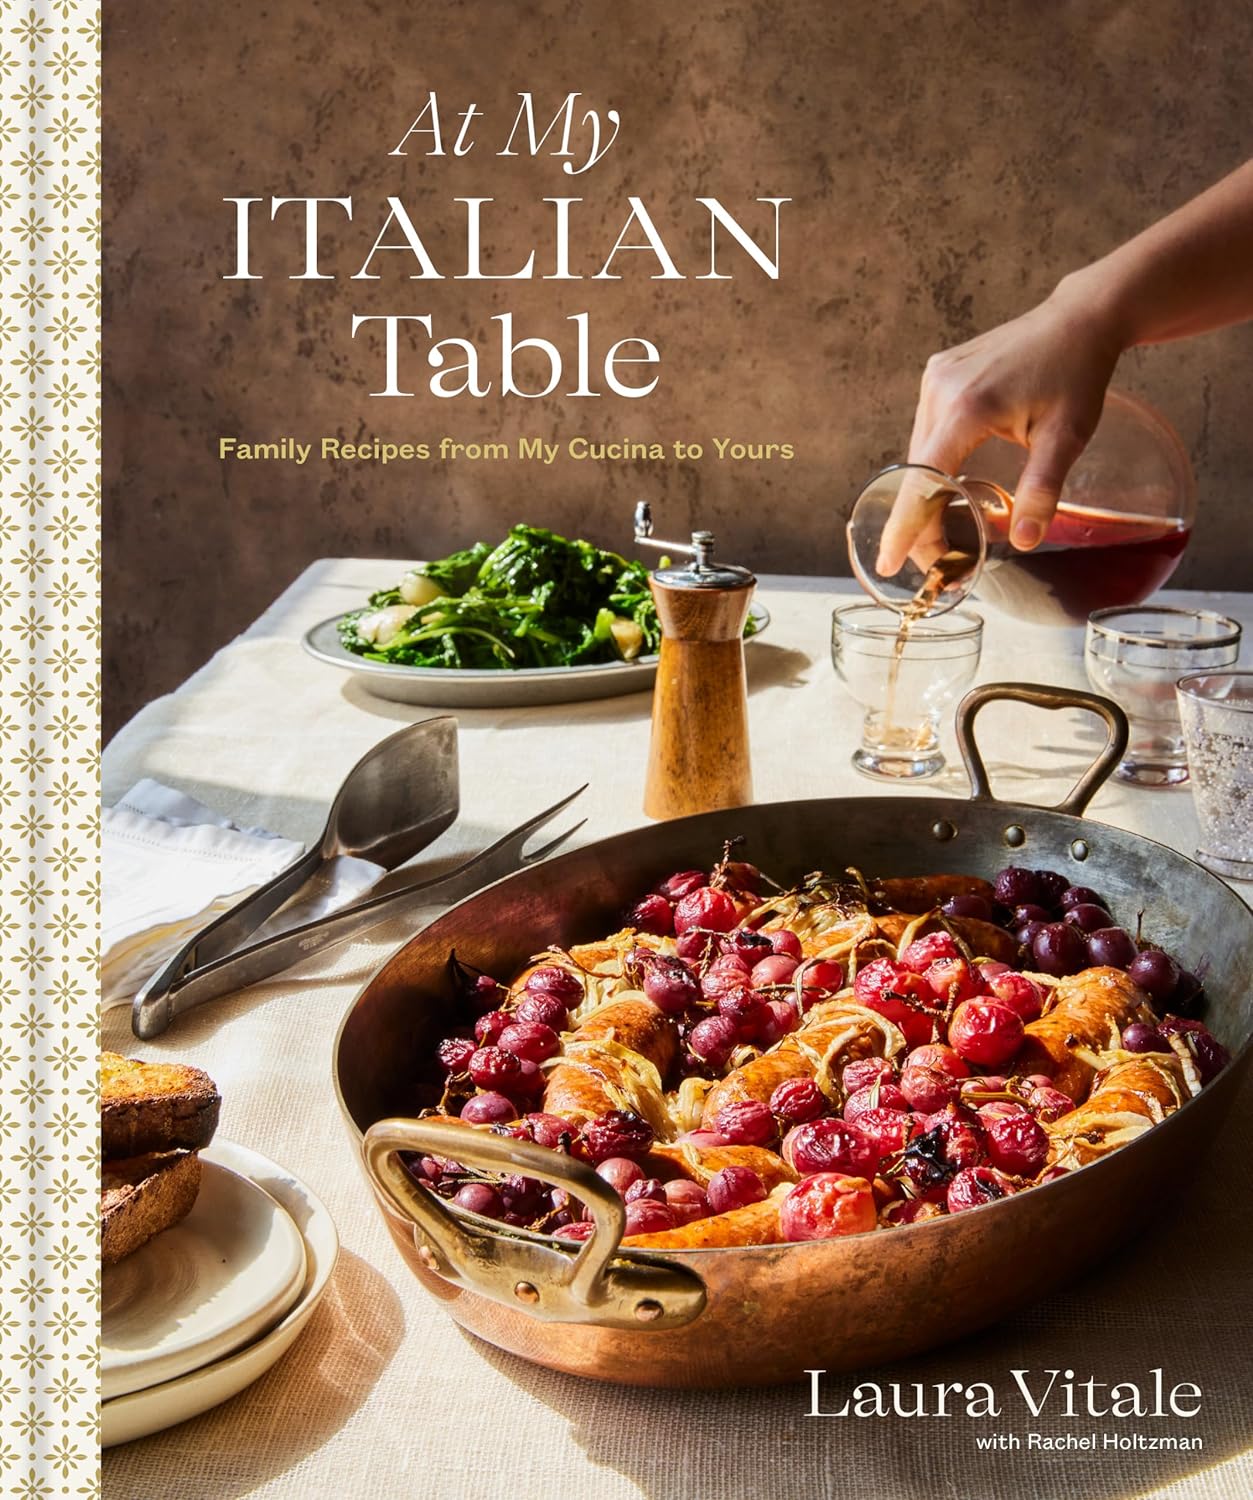 At My Italian Table: Family Recipes from My Cucina to Yours (Laura Vitale, Rachel Holtzman) *Signed*